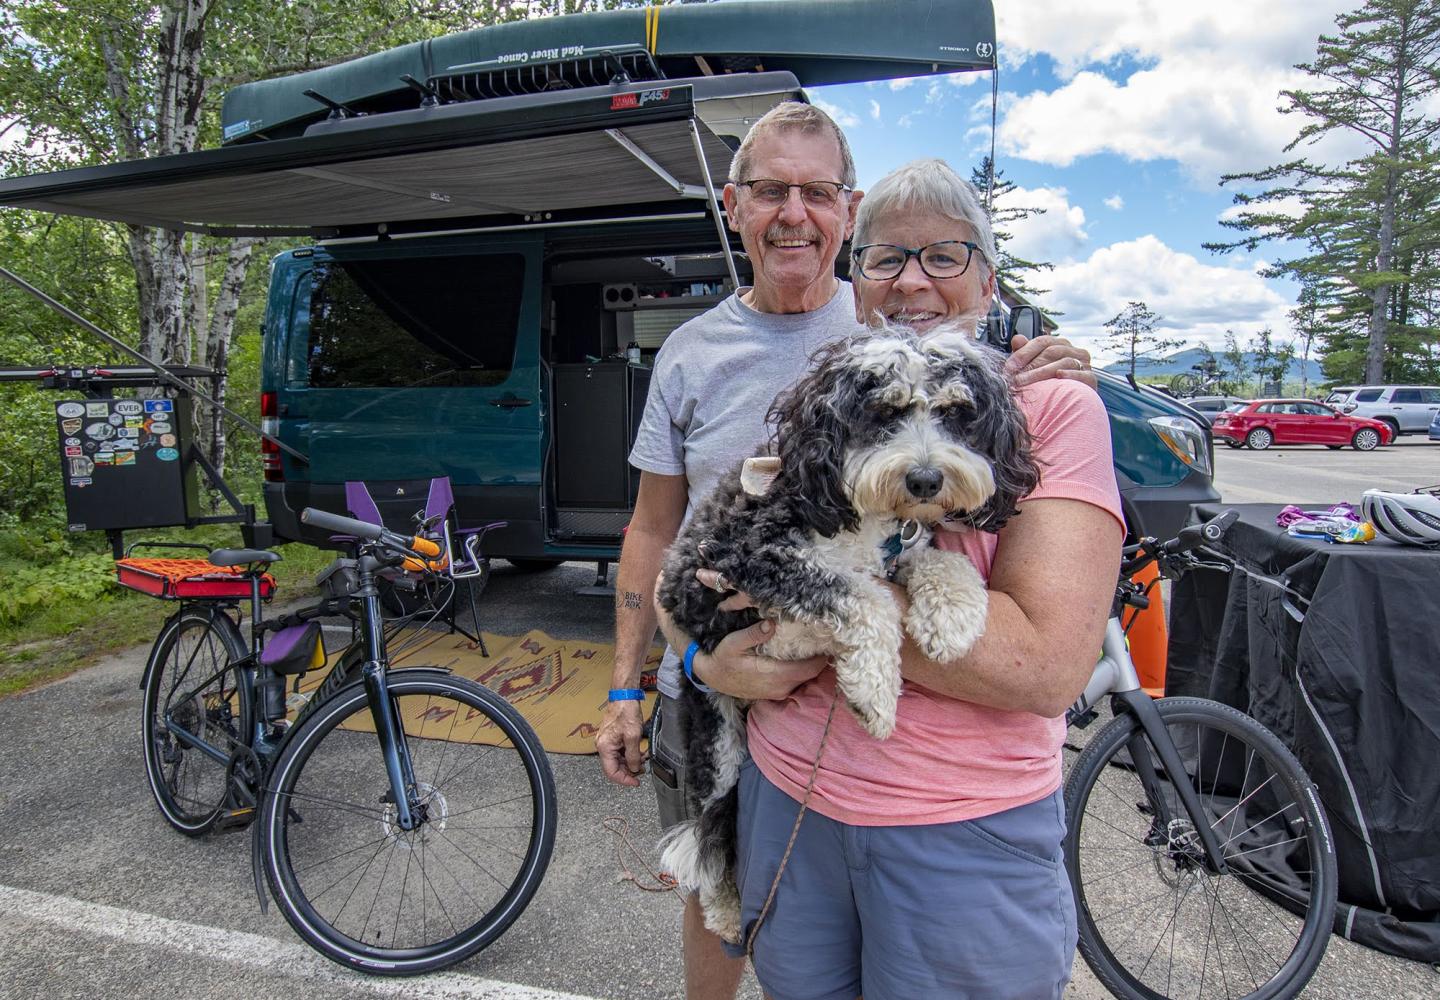 Yes, the Weekender is RV and puppy friendly.